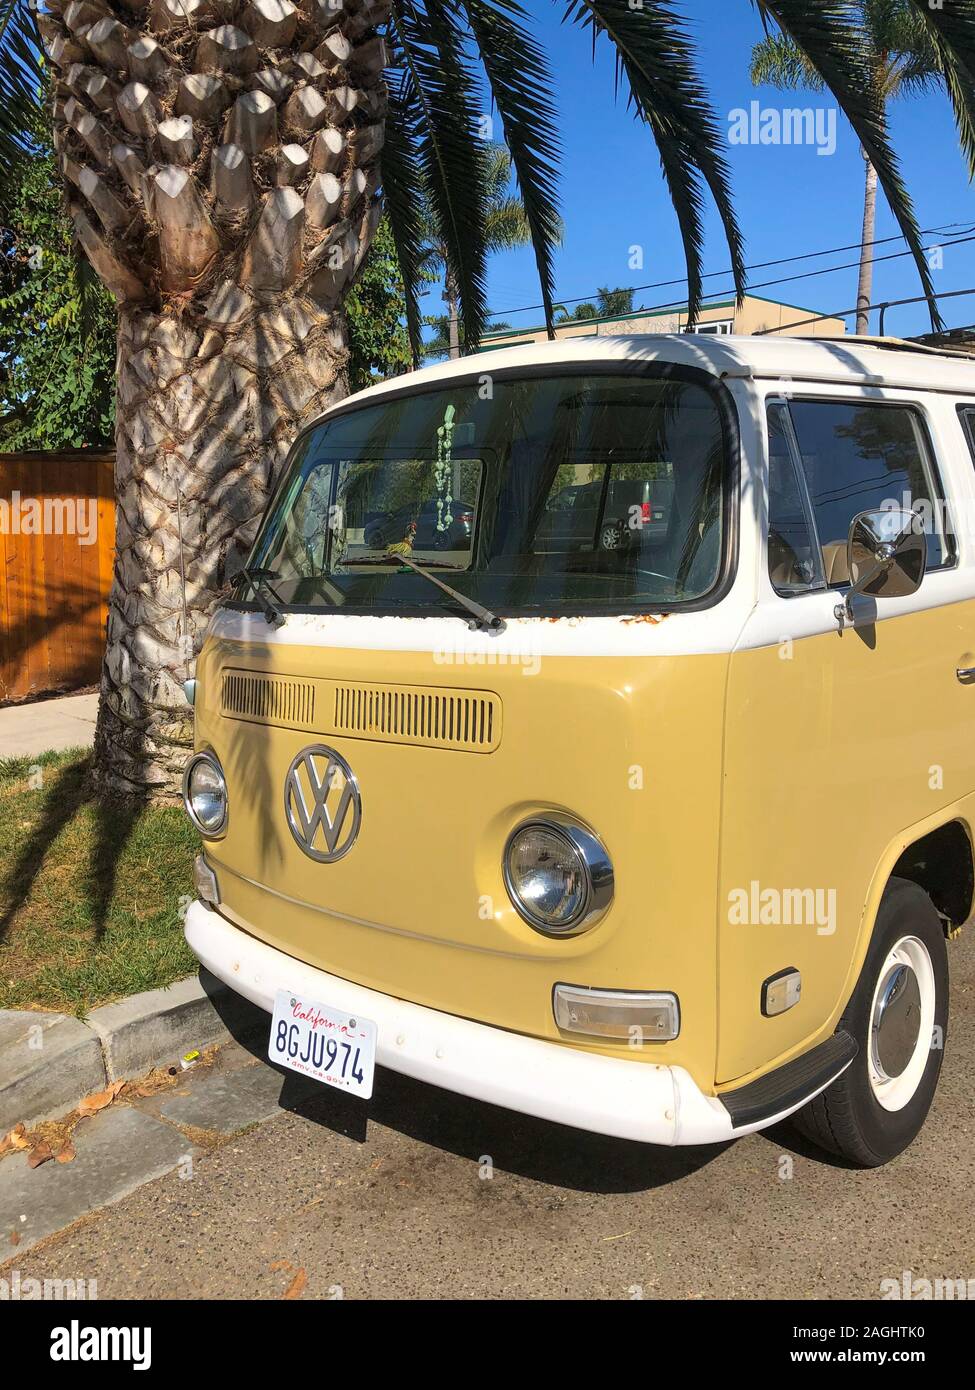 Classic beige and white vintage Volkswagen T1 camper van. San Diego, California, USA. July 13th, 2019 Stock Photo